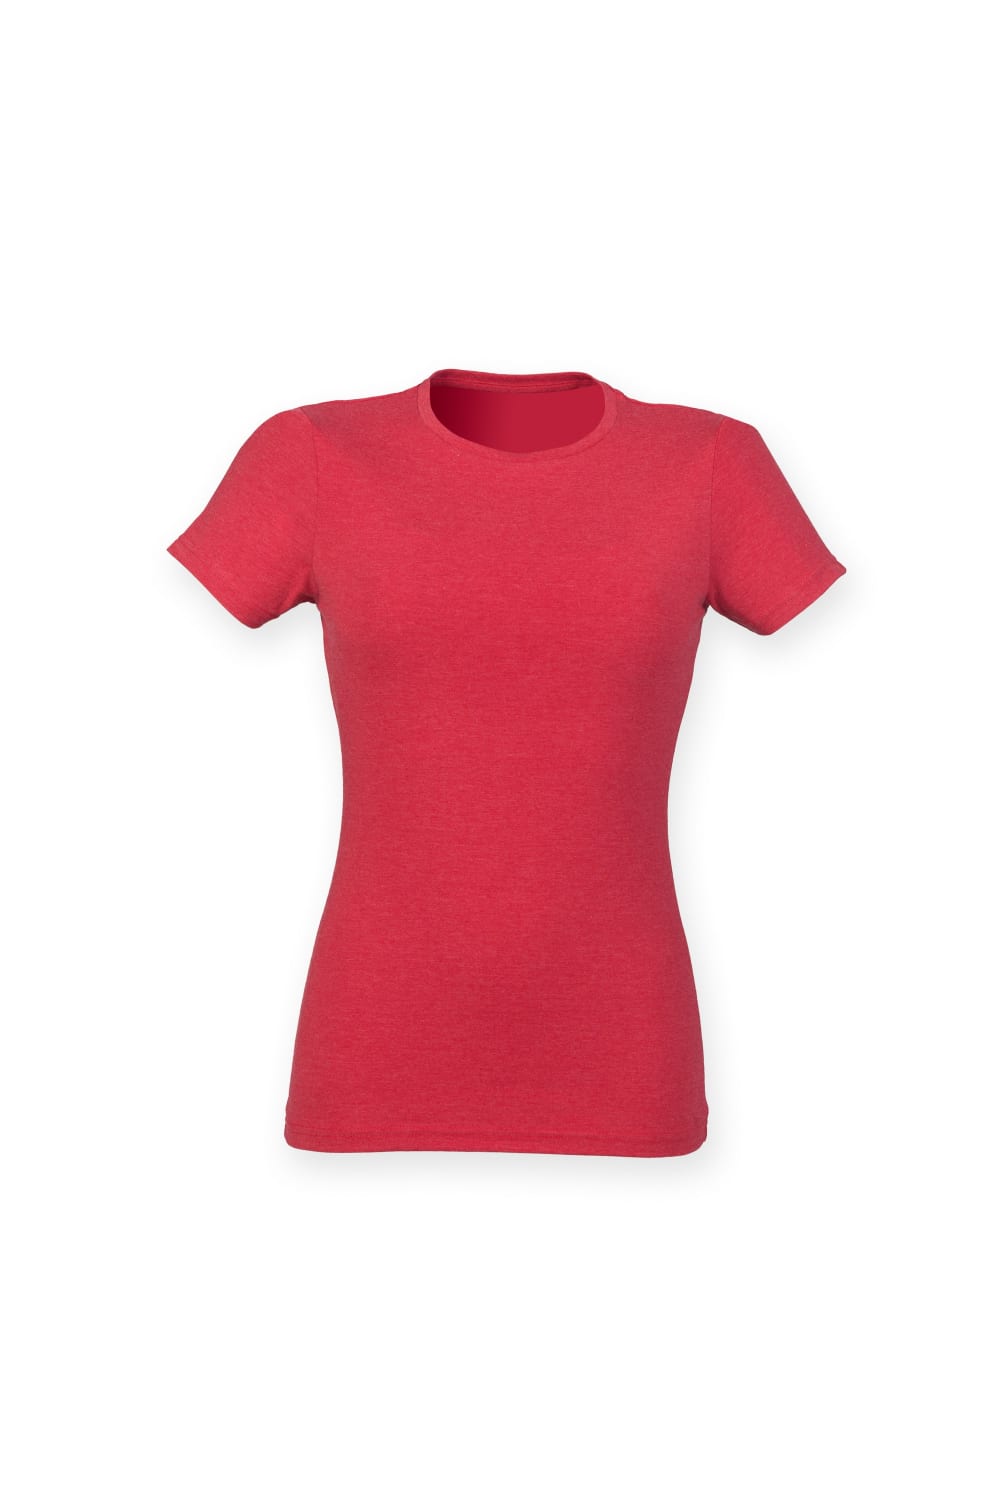 Skinni Fit Womens/Ladies Triblend Short Sleeve T-Shirt (Red Triblend)